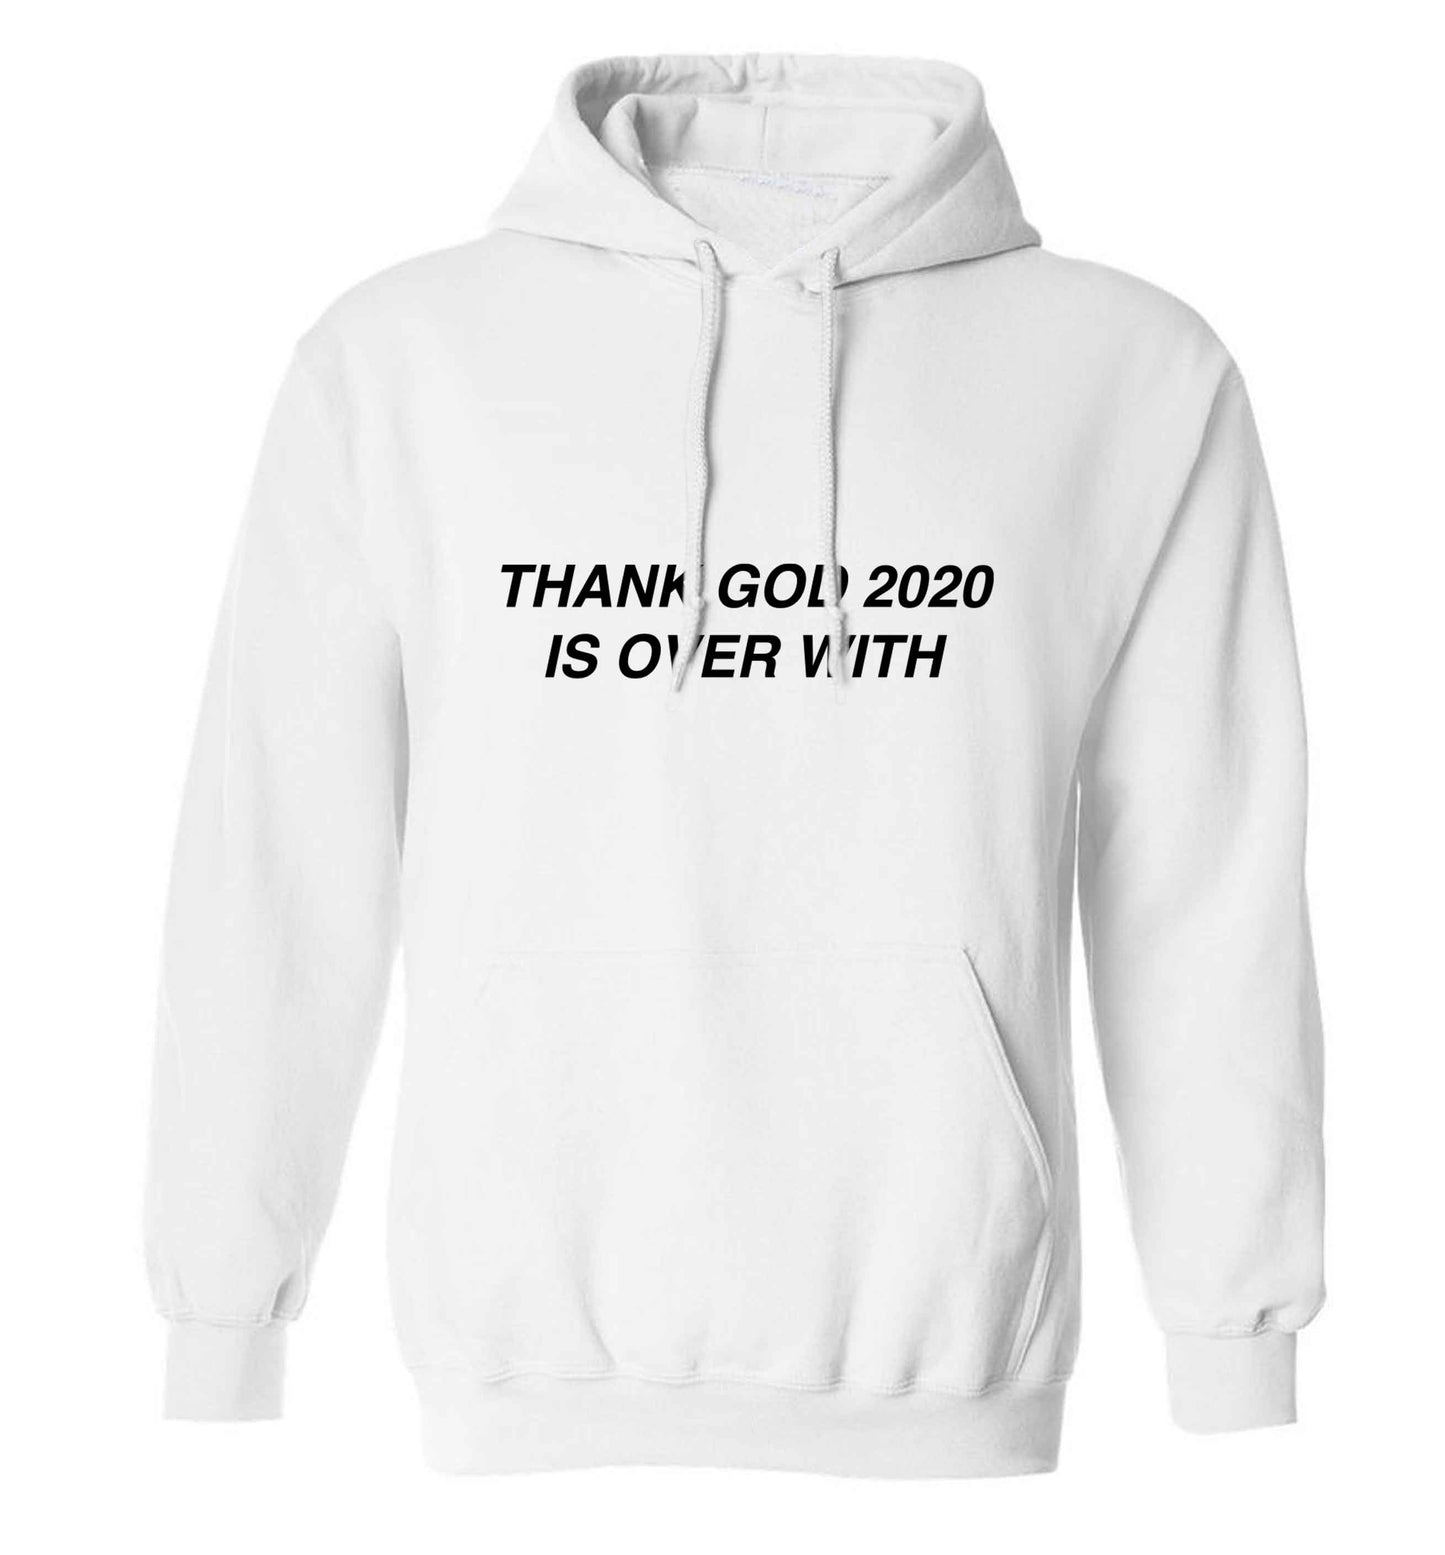 Thank god 2020 is over with adults unisex white hoodie 2XL